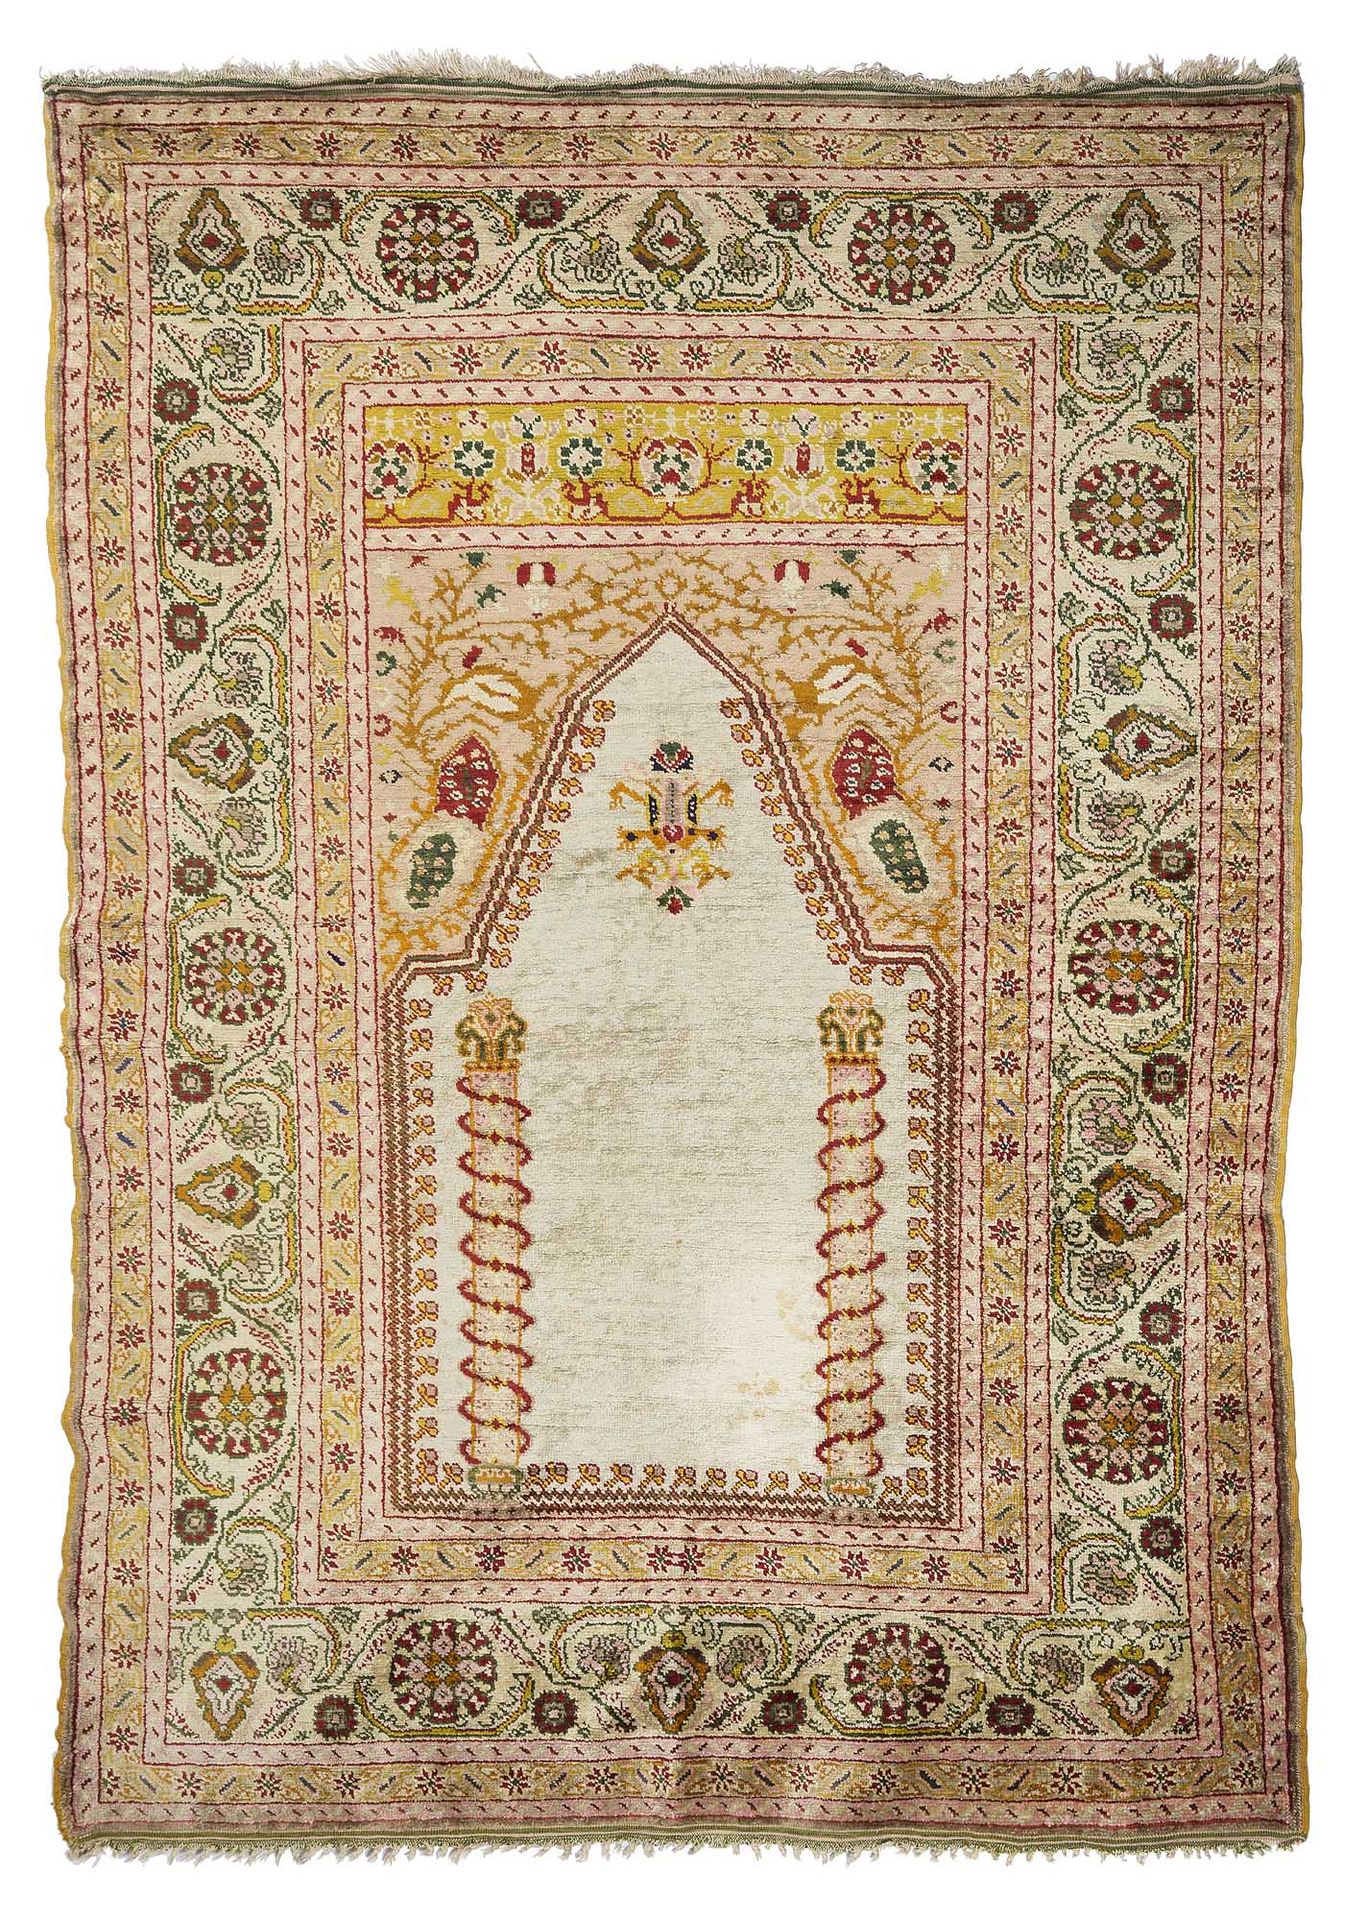 Null Silk KAYCÉRI carpet (Asia Minor), early 20th century

Dimensions : 155 x 11&hellip;